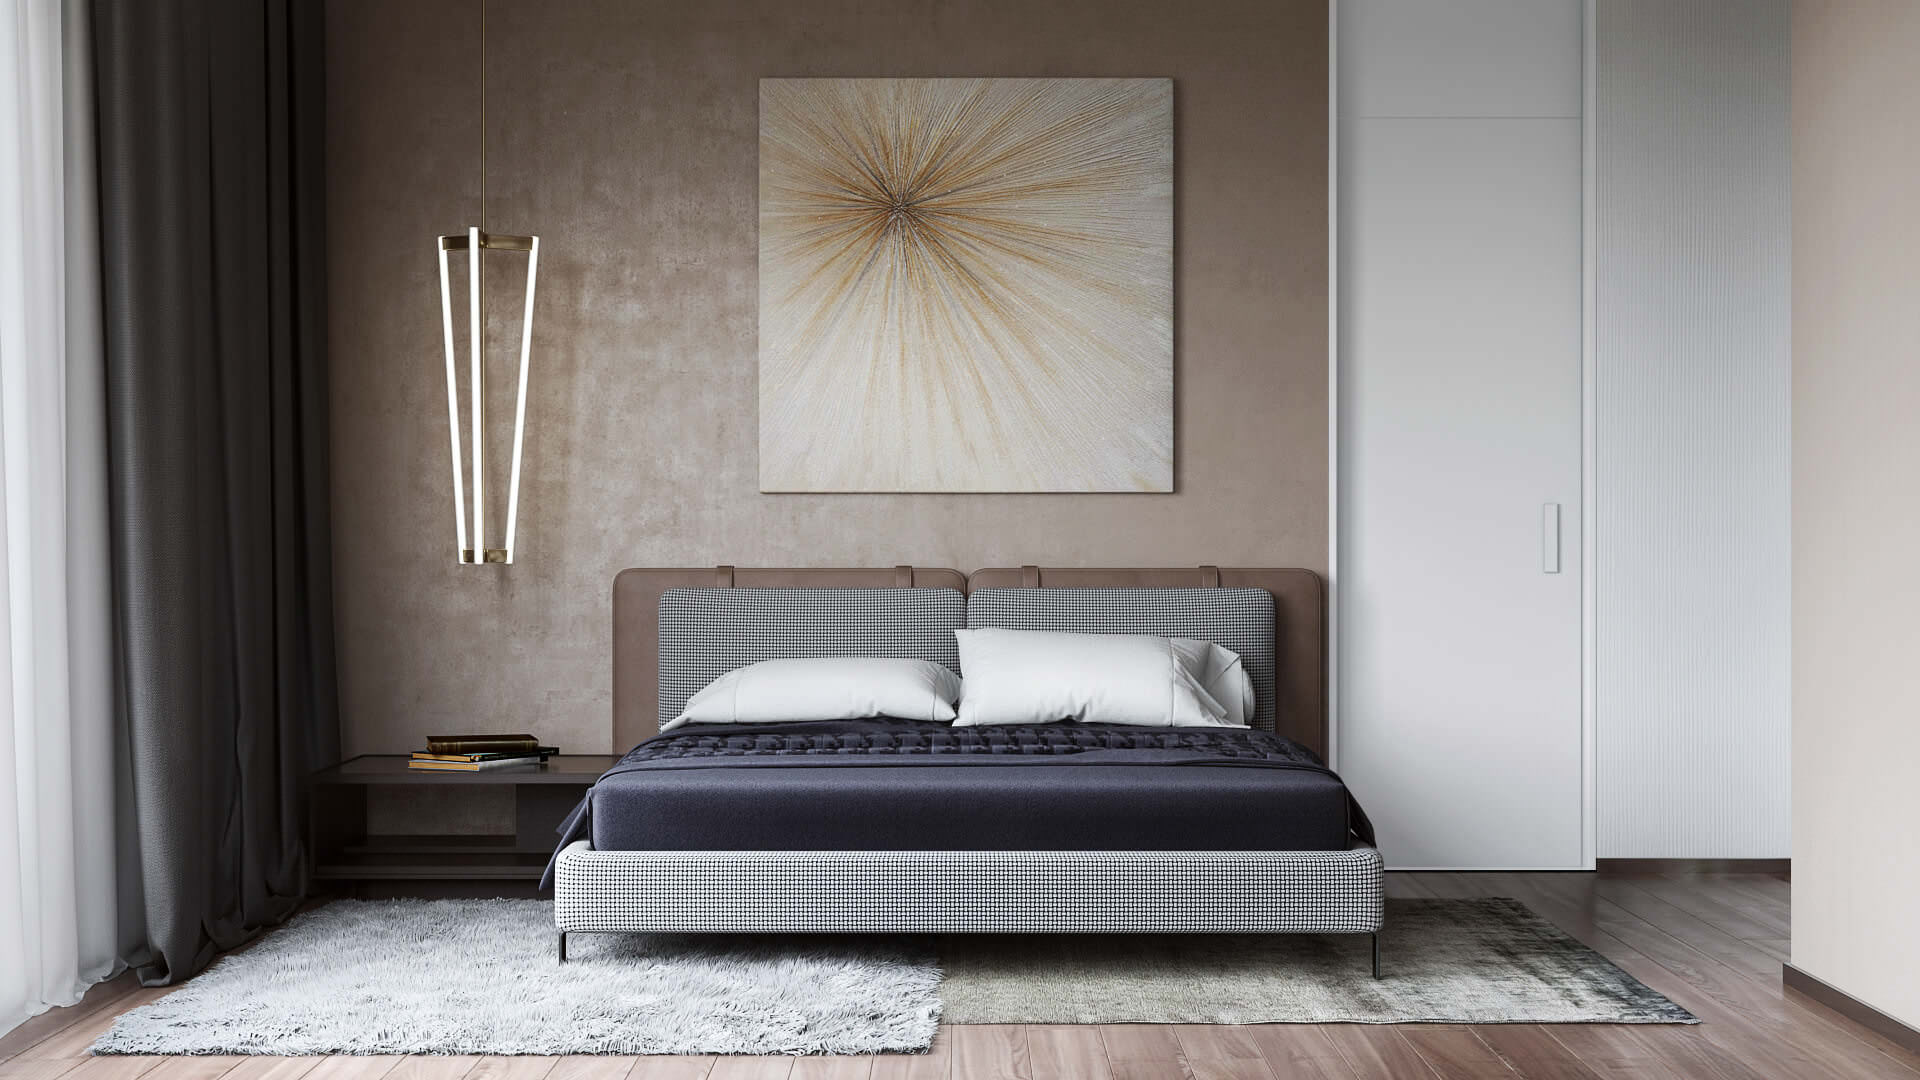 A CG Render Showing a Modern Bedroom Interior